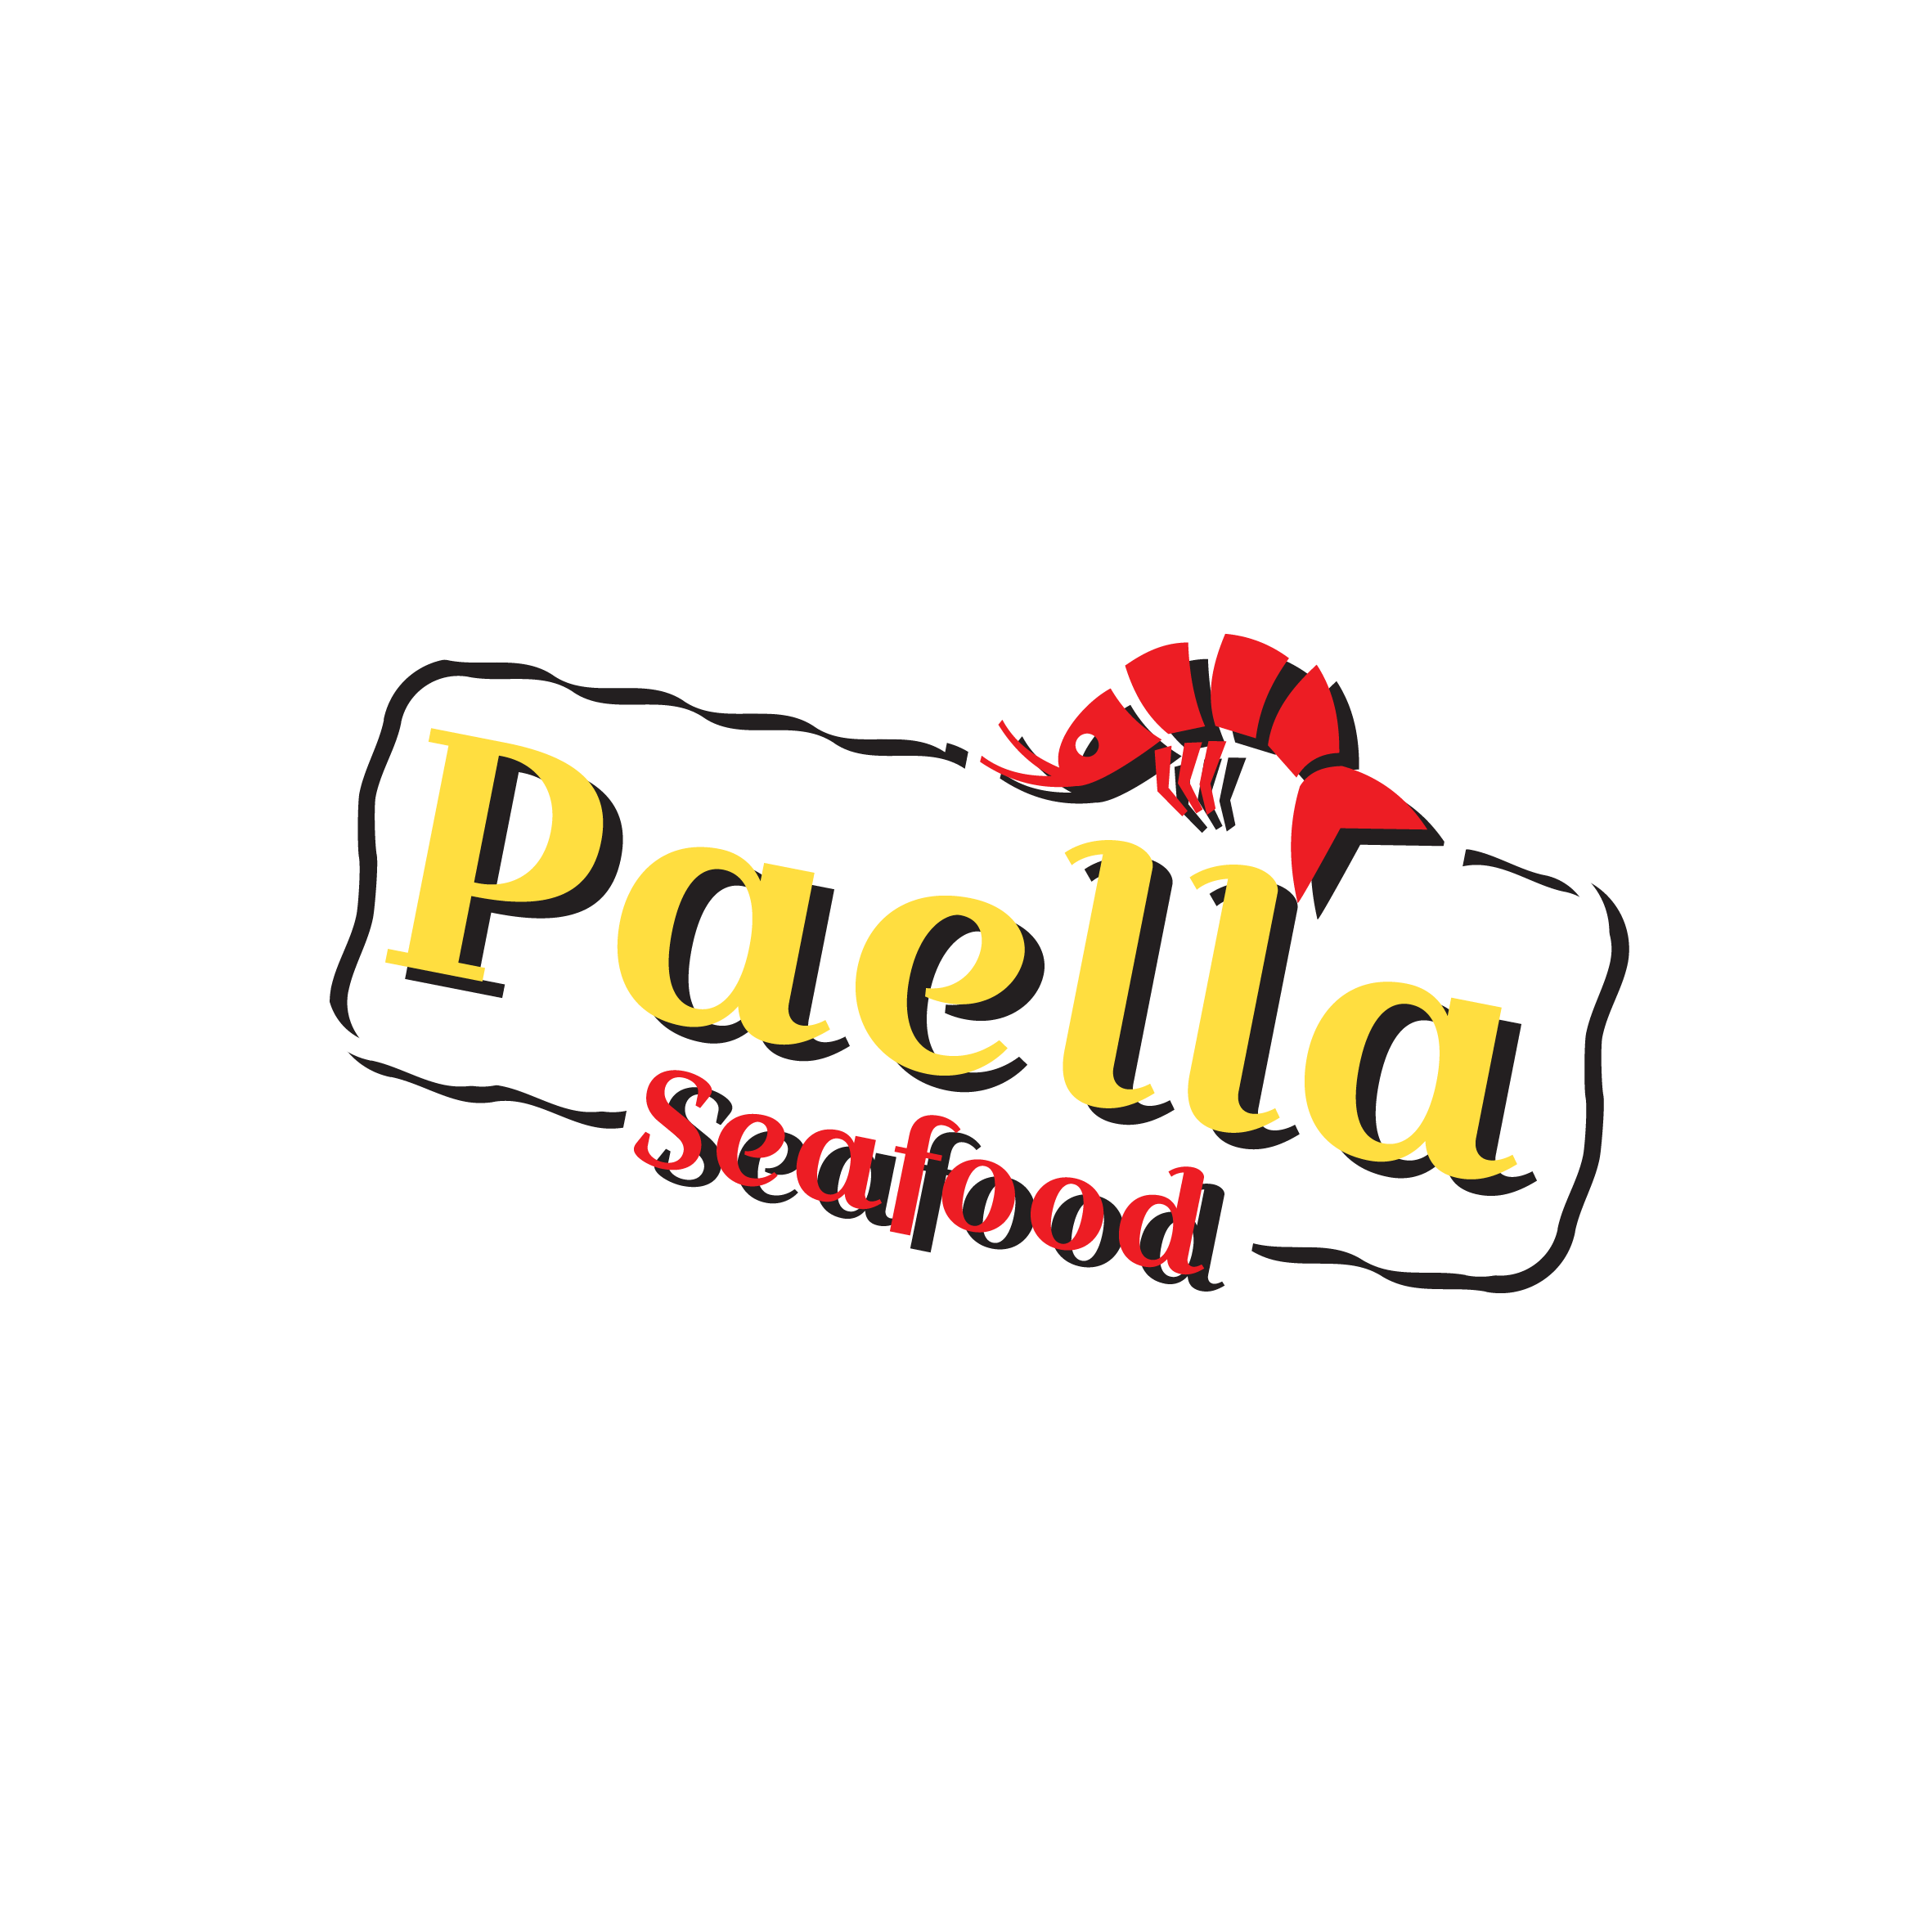 Paella Logo Tansparent Background.png